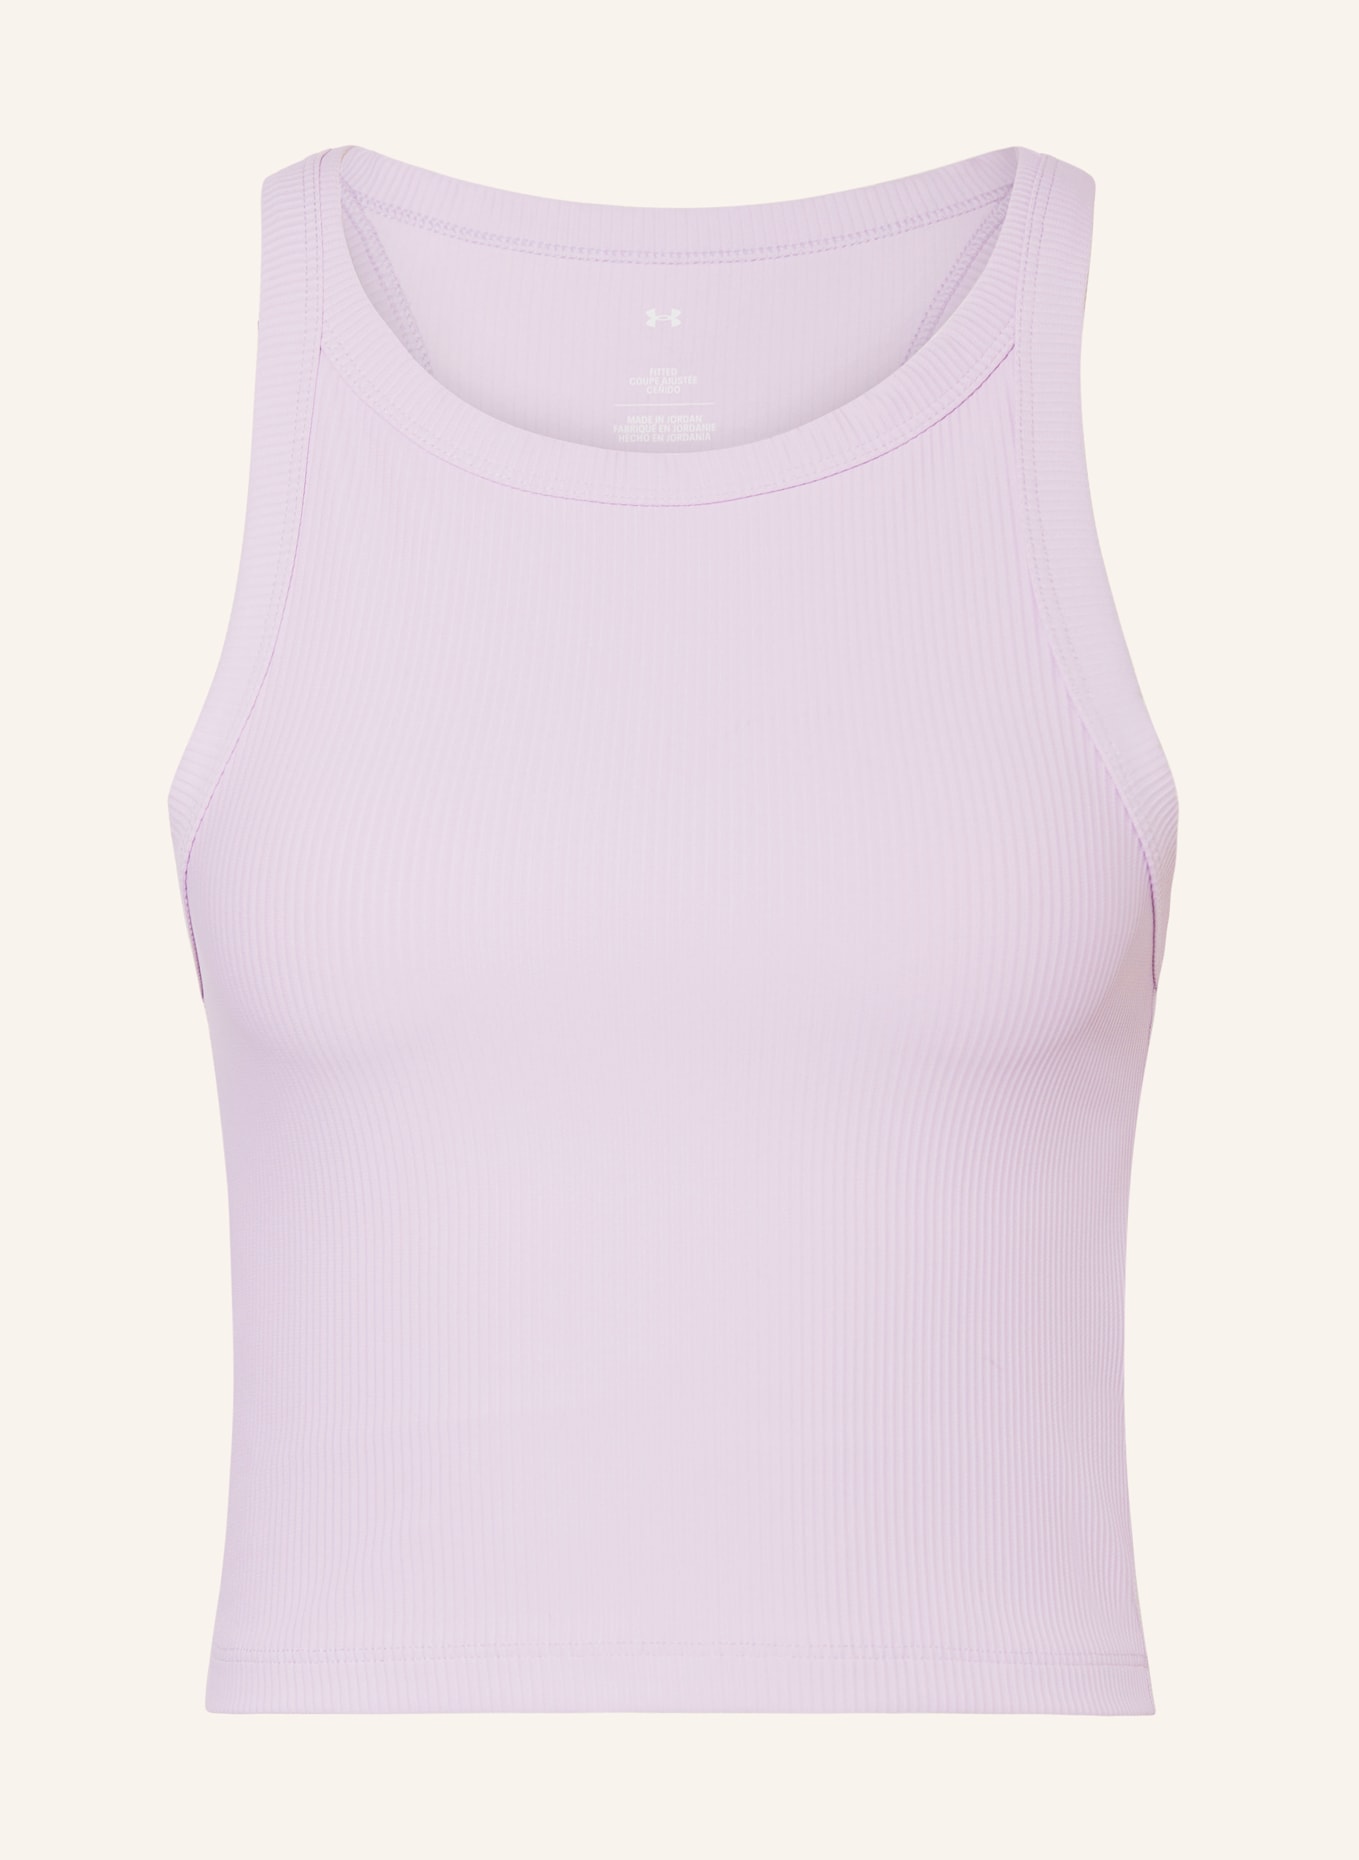 UNDER ARMOUR Cropped-Top MERIDIAN, Farbe: HELLLILA (Bild 1)